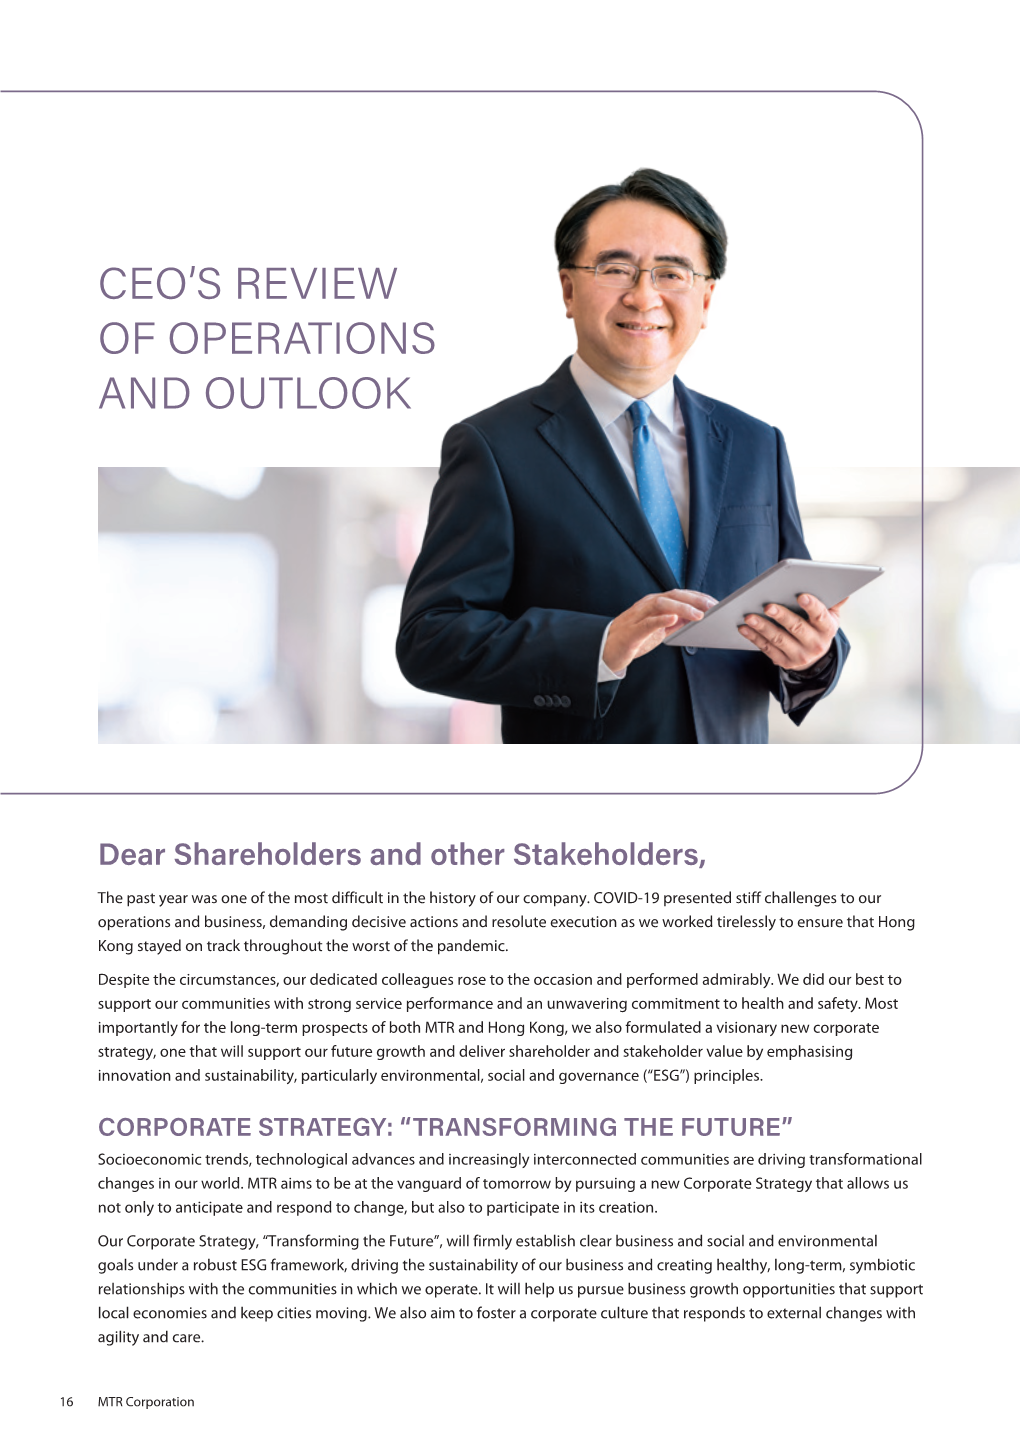 Ceo's Review of Operations and Outlook